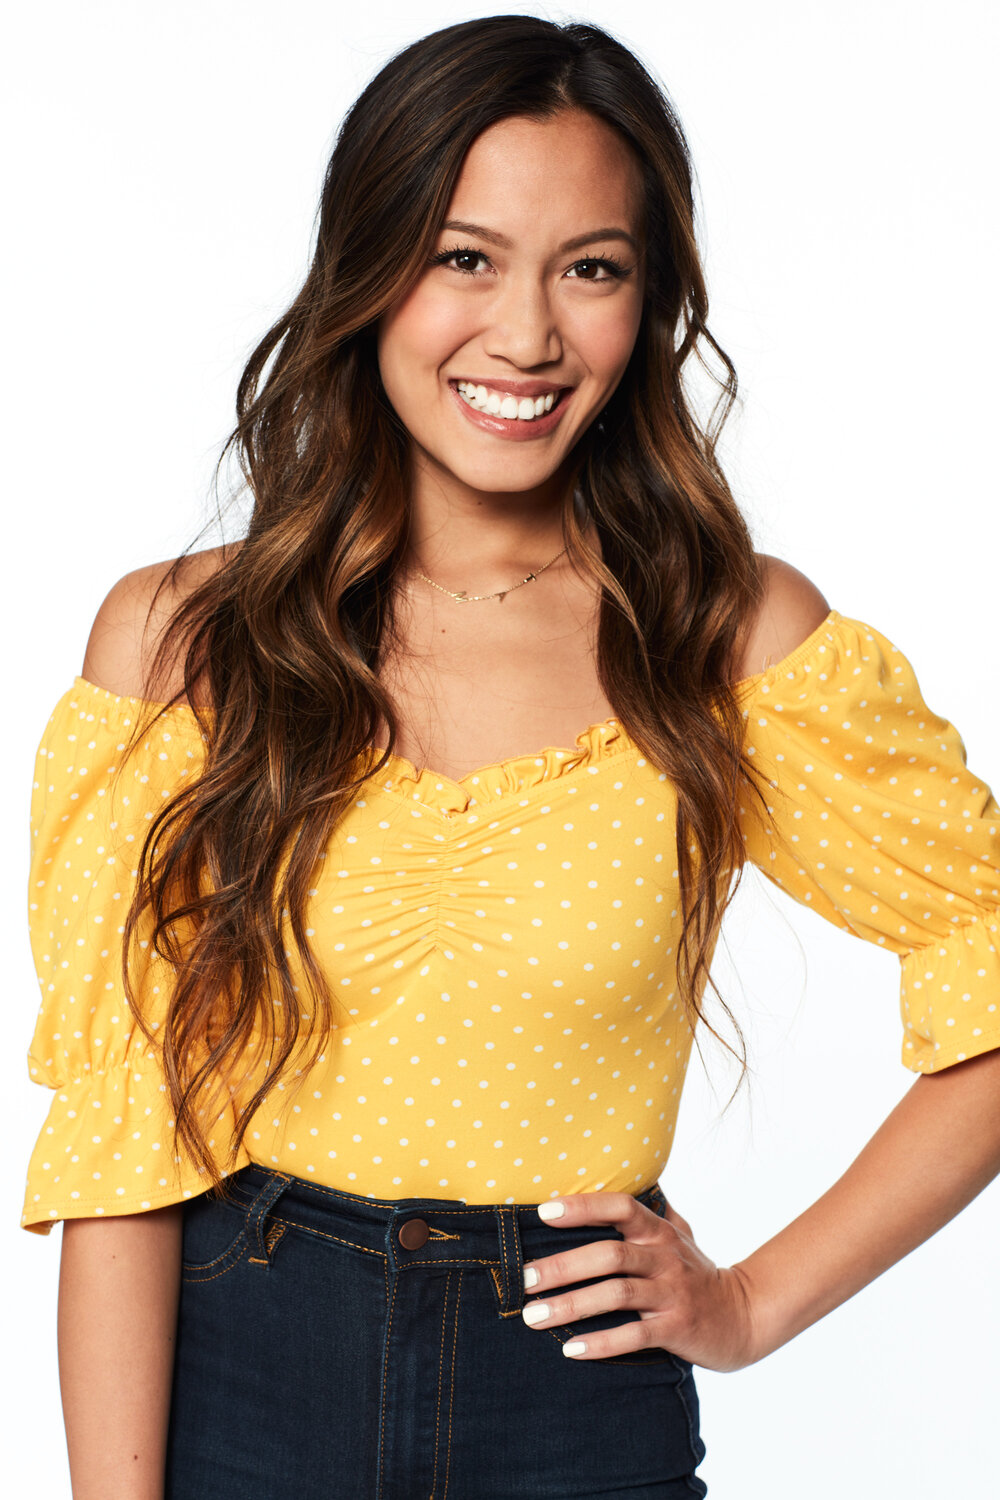 Tammy Ly - Bachelor 24 - *Sleuthing Spoilers* Tammy